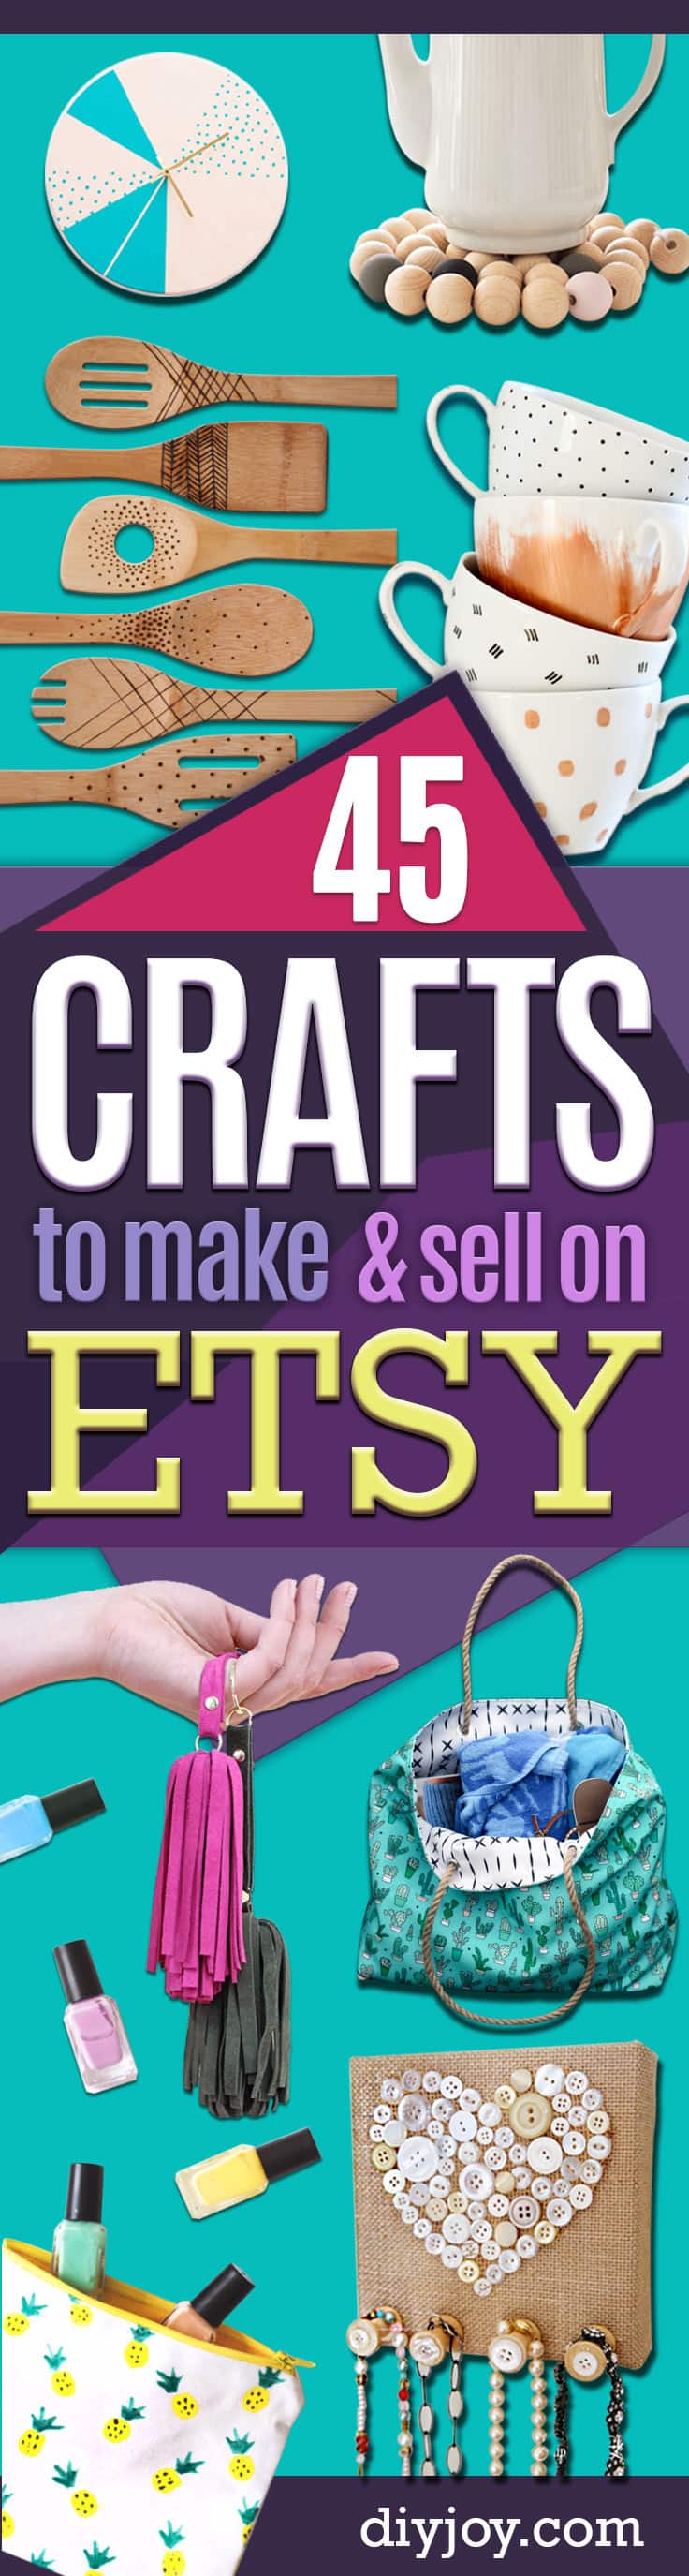 45-creative-crafts-to-make-and-sell-on-etsy